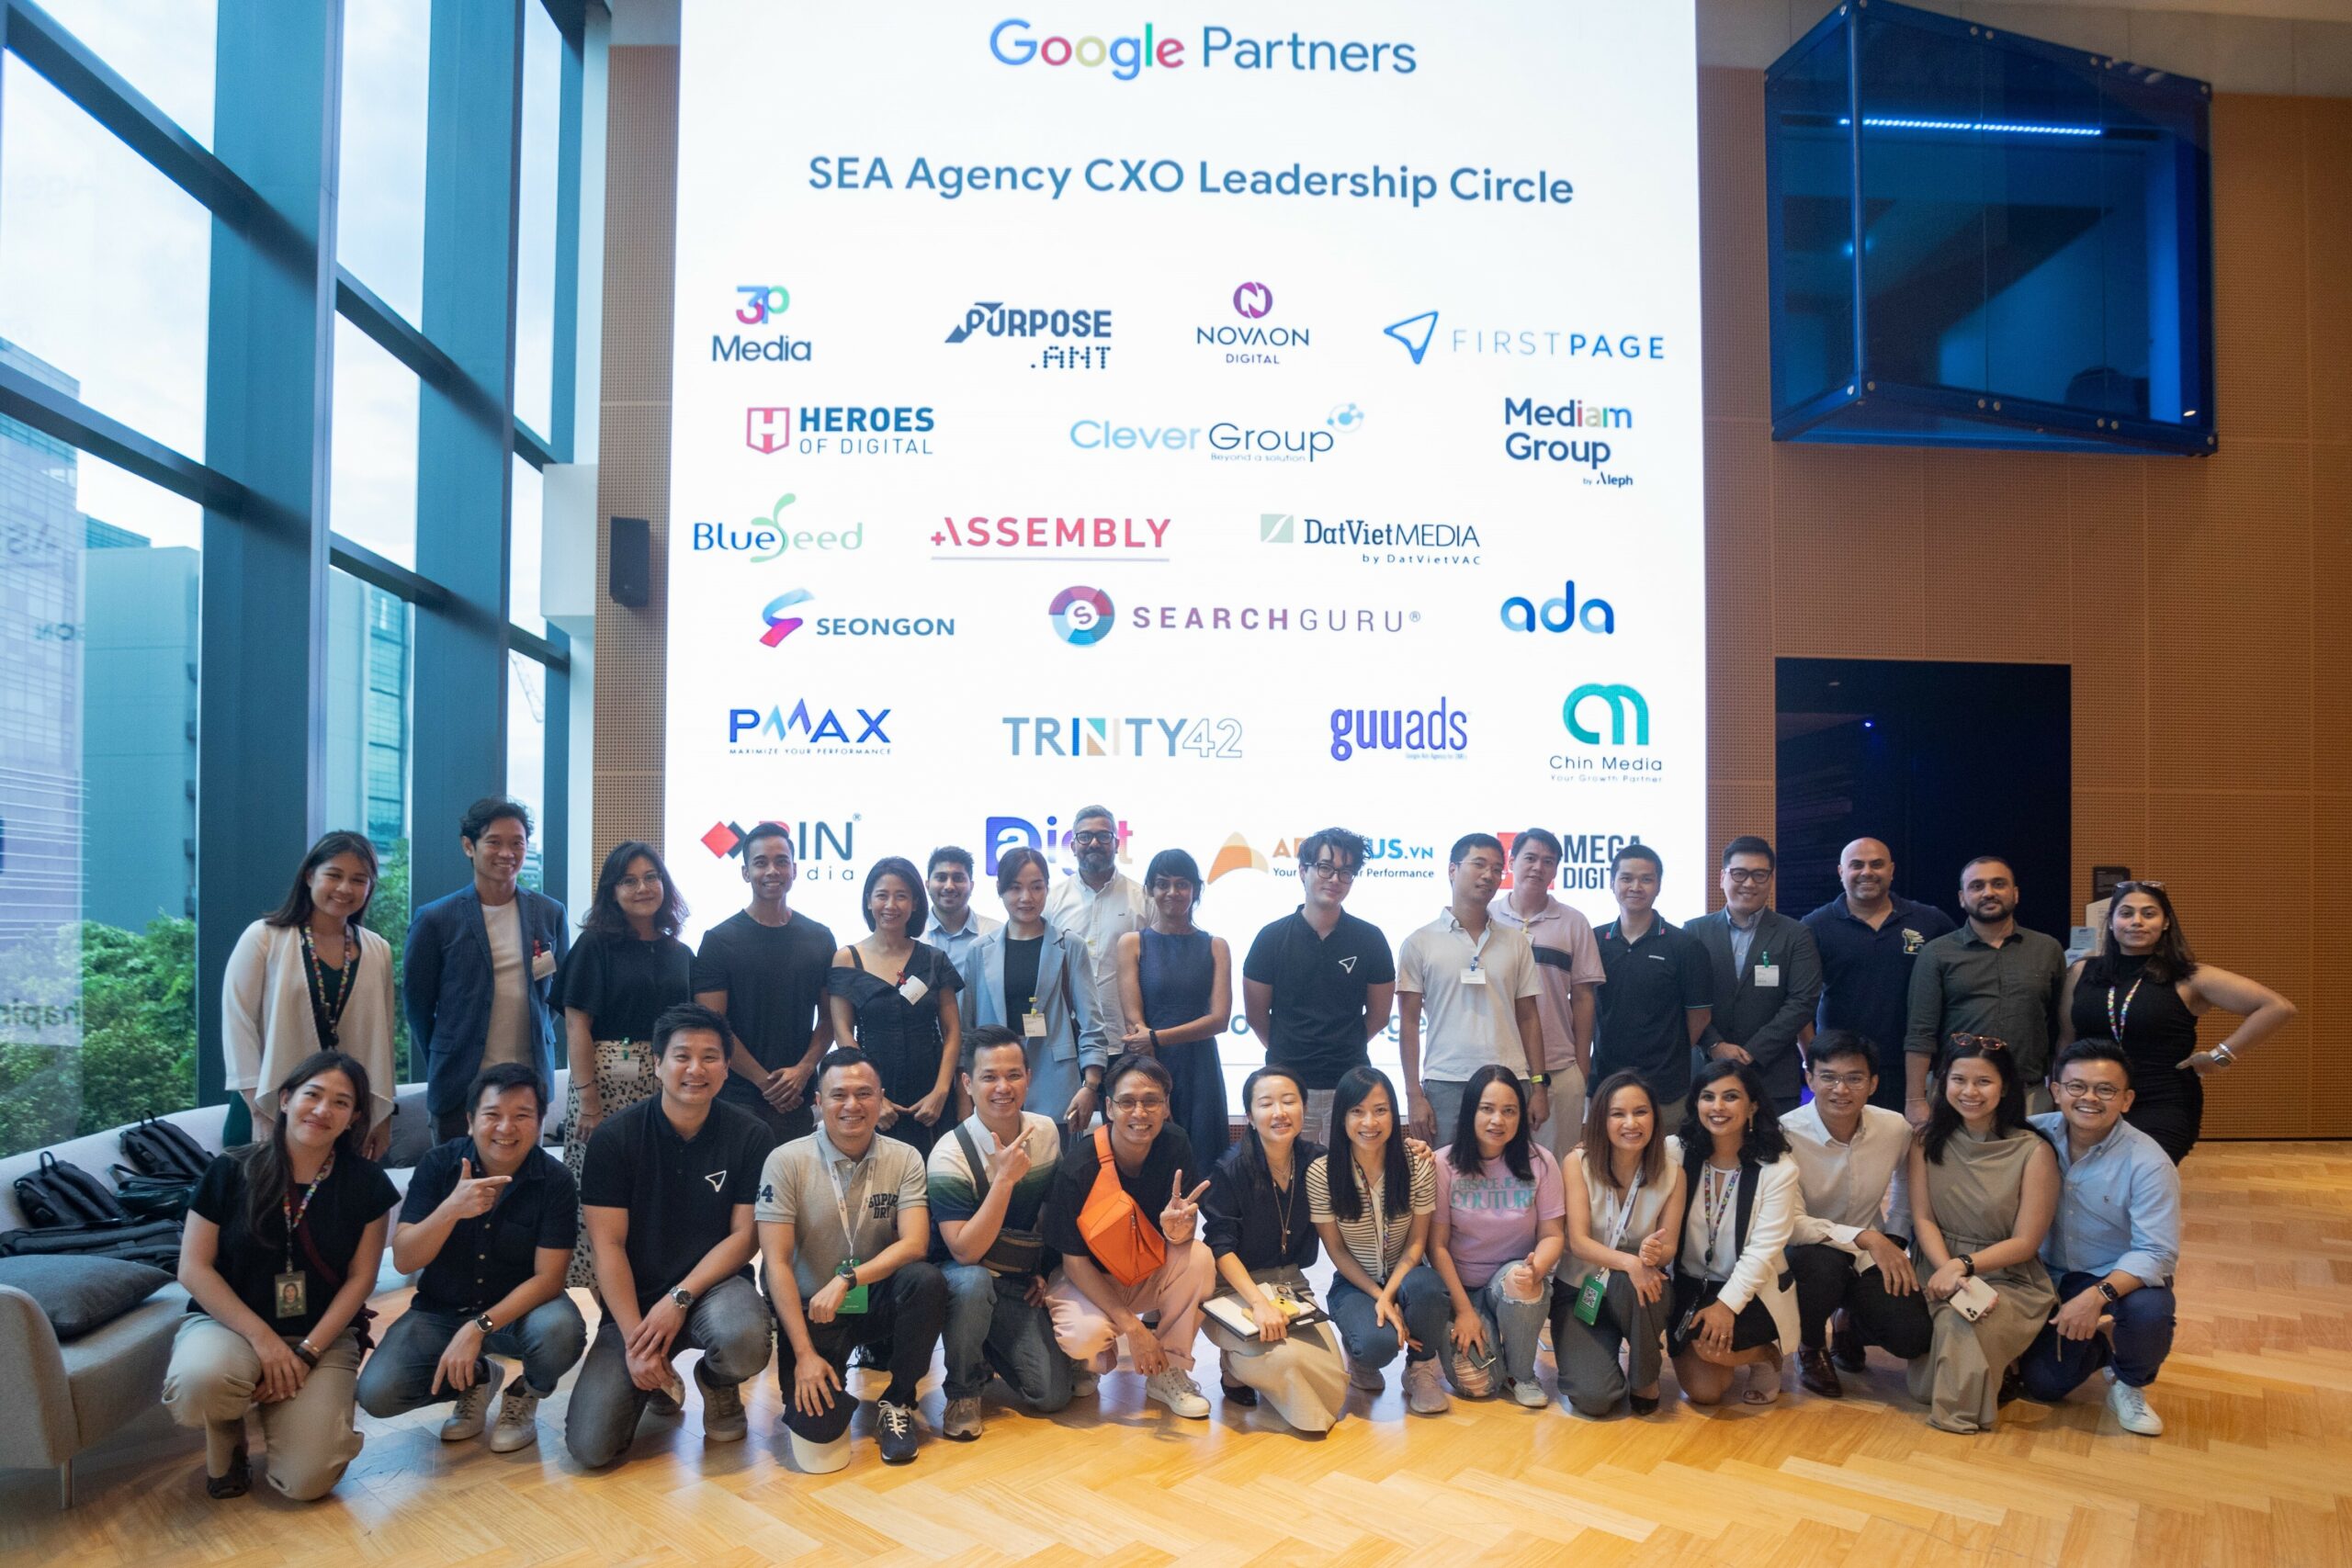 The Digital Beat Goes On: Key Insights From Google's SEA CXO Event